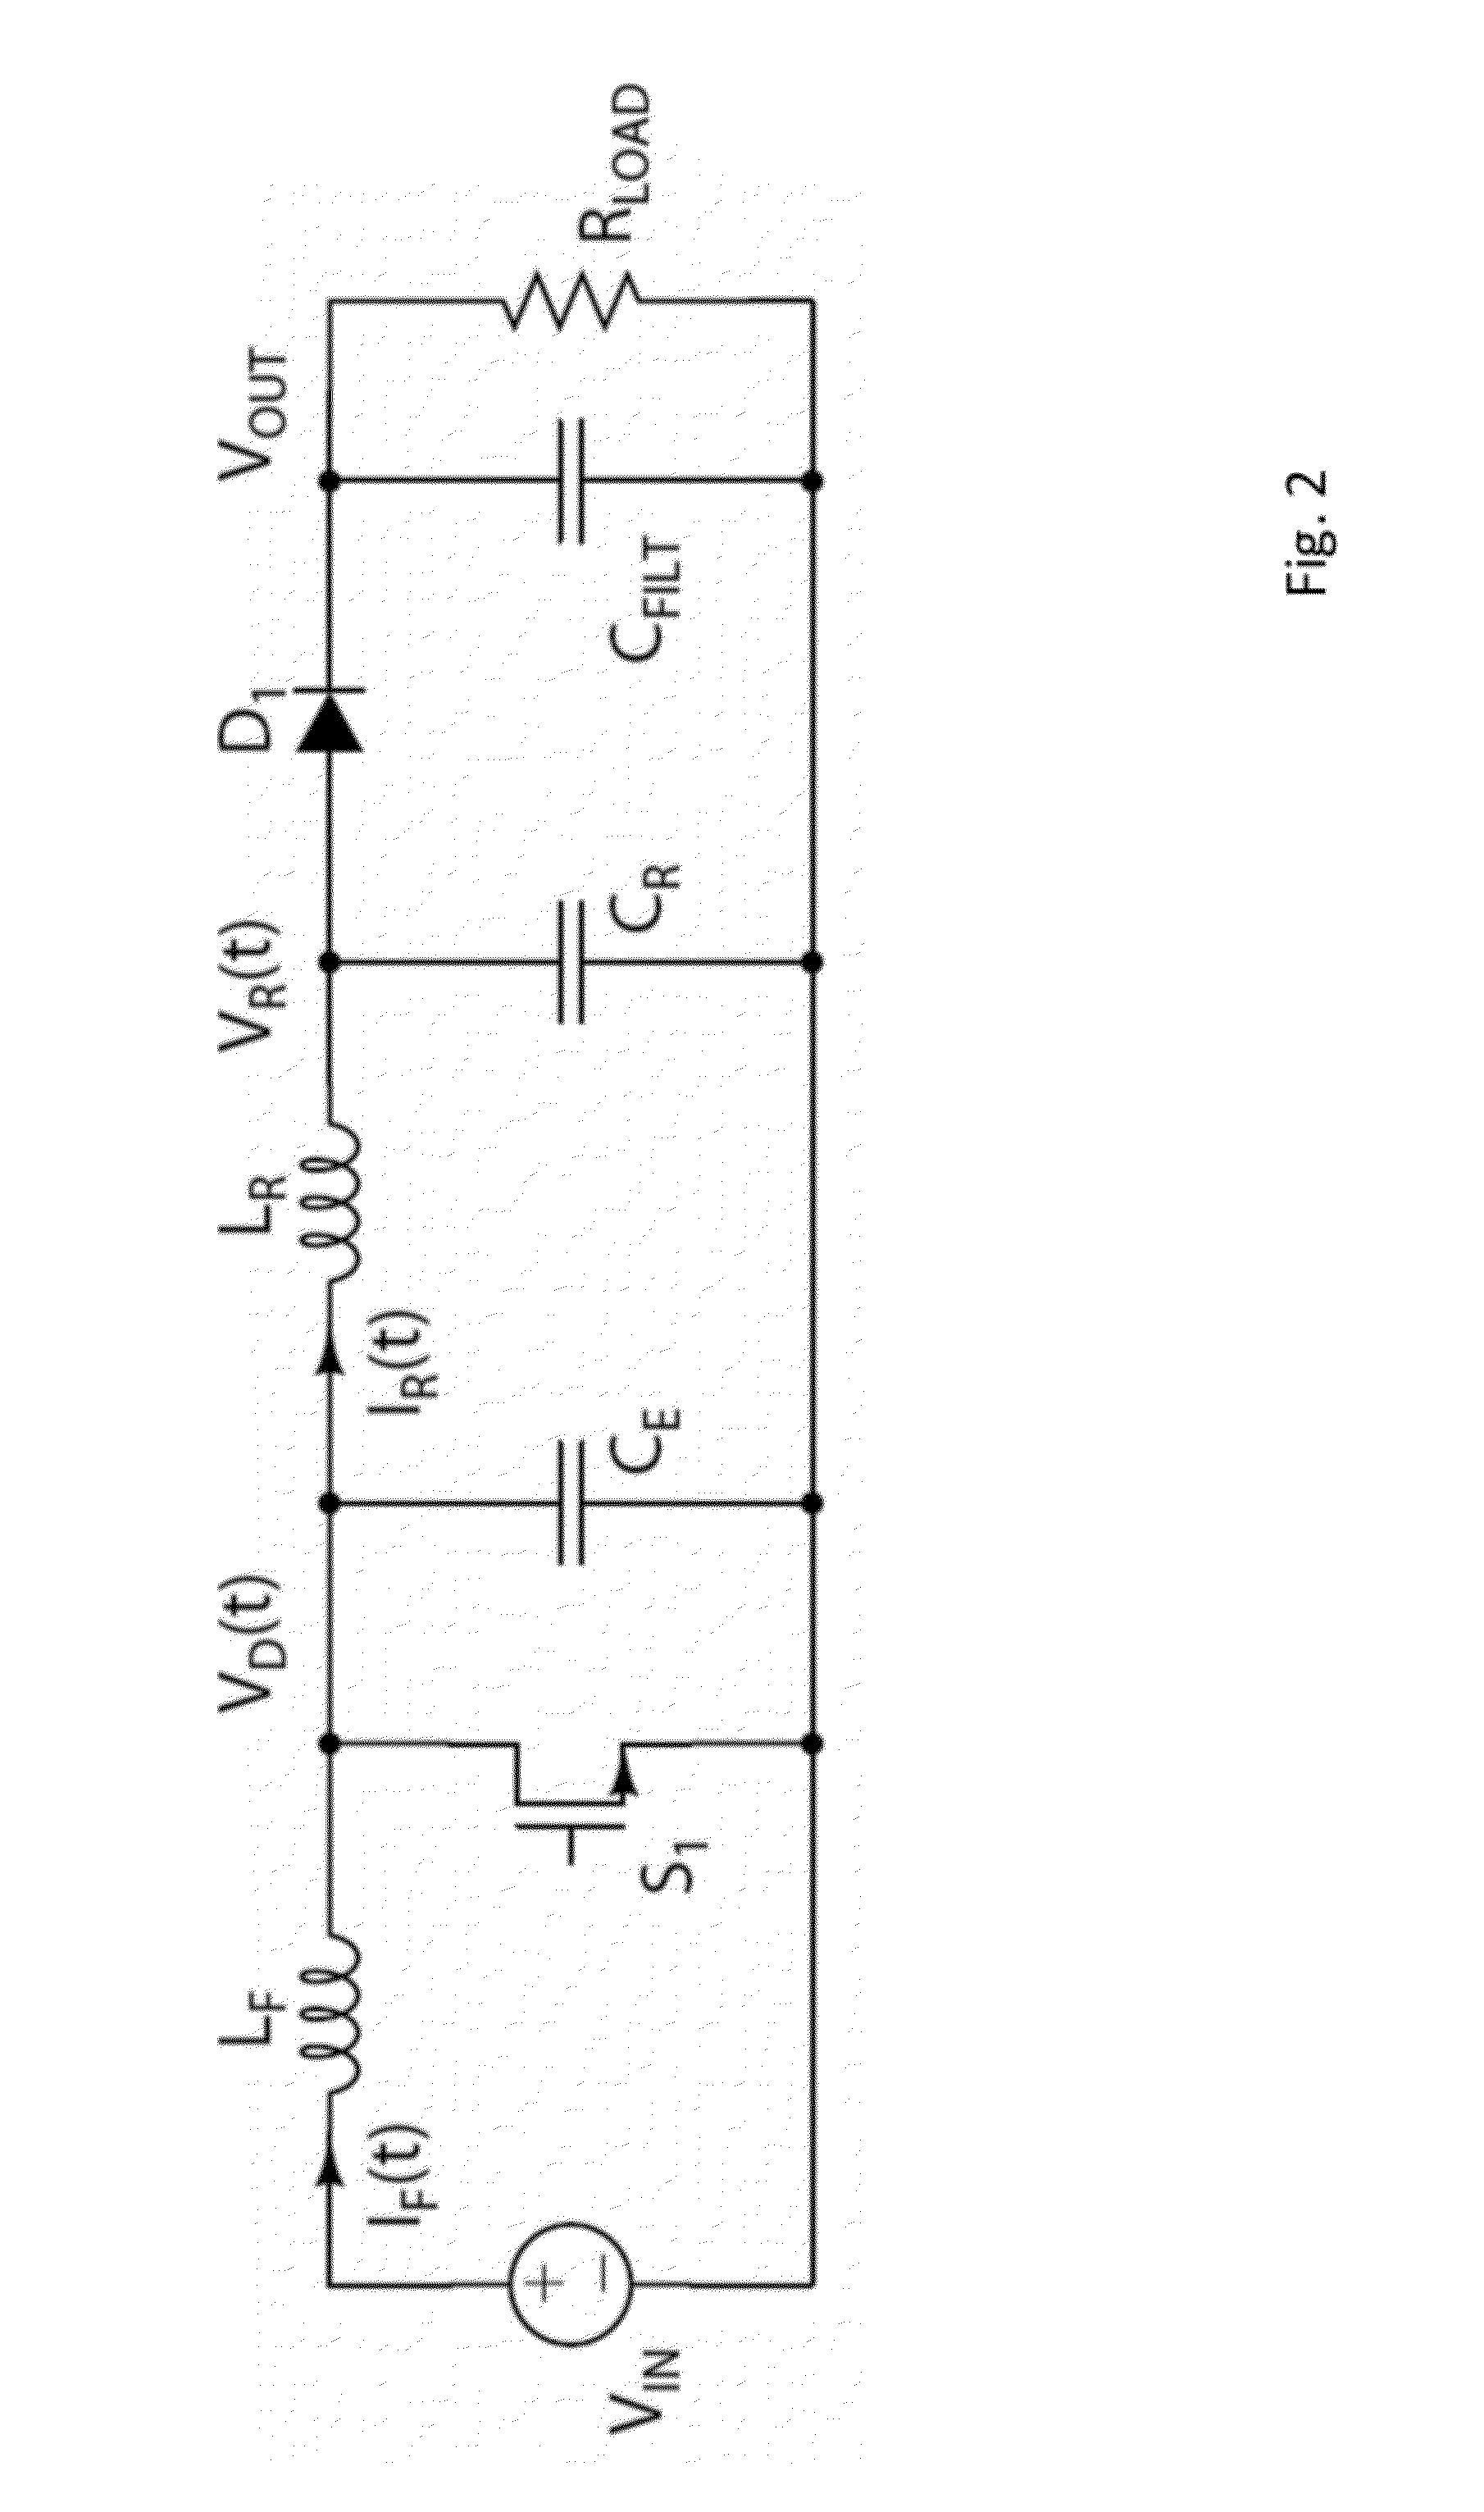 Very high frequency switching cell-based power converter